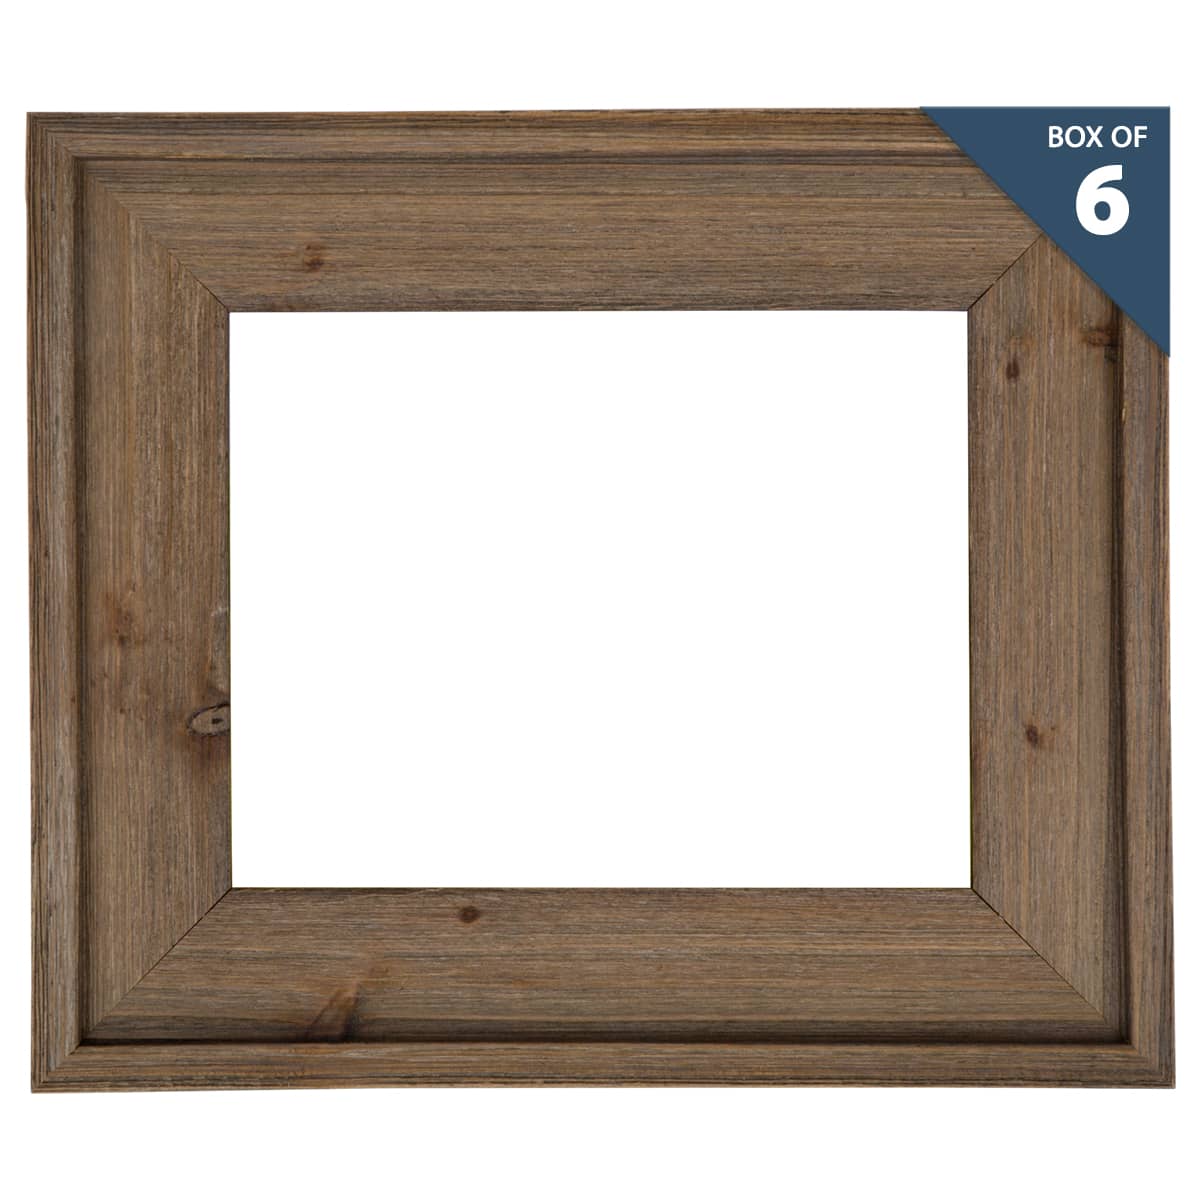 TONES FRAME DESIGN 16x20 Picture Frame Matted to 11x14 Black Solid Wood  Venner Finish Finish and Plexiglass Front Large Picture Frames for Poster